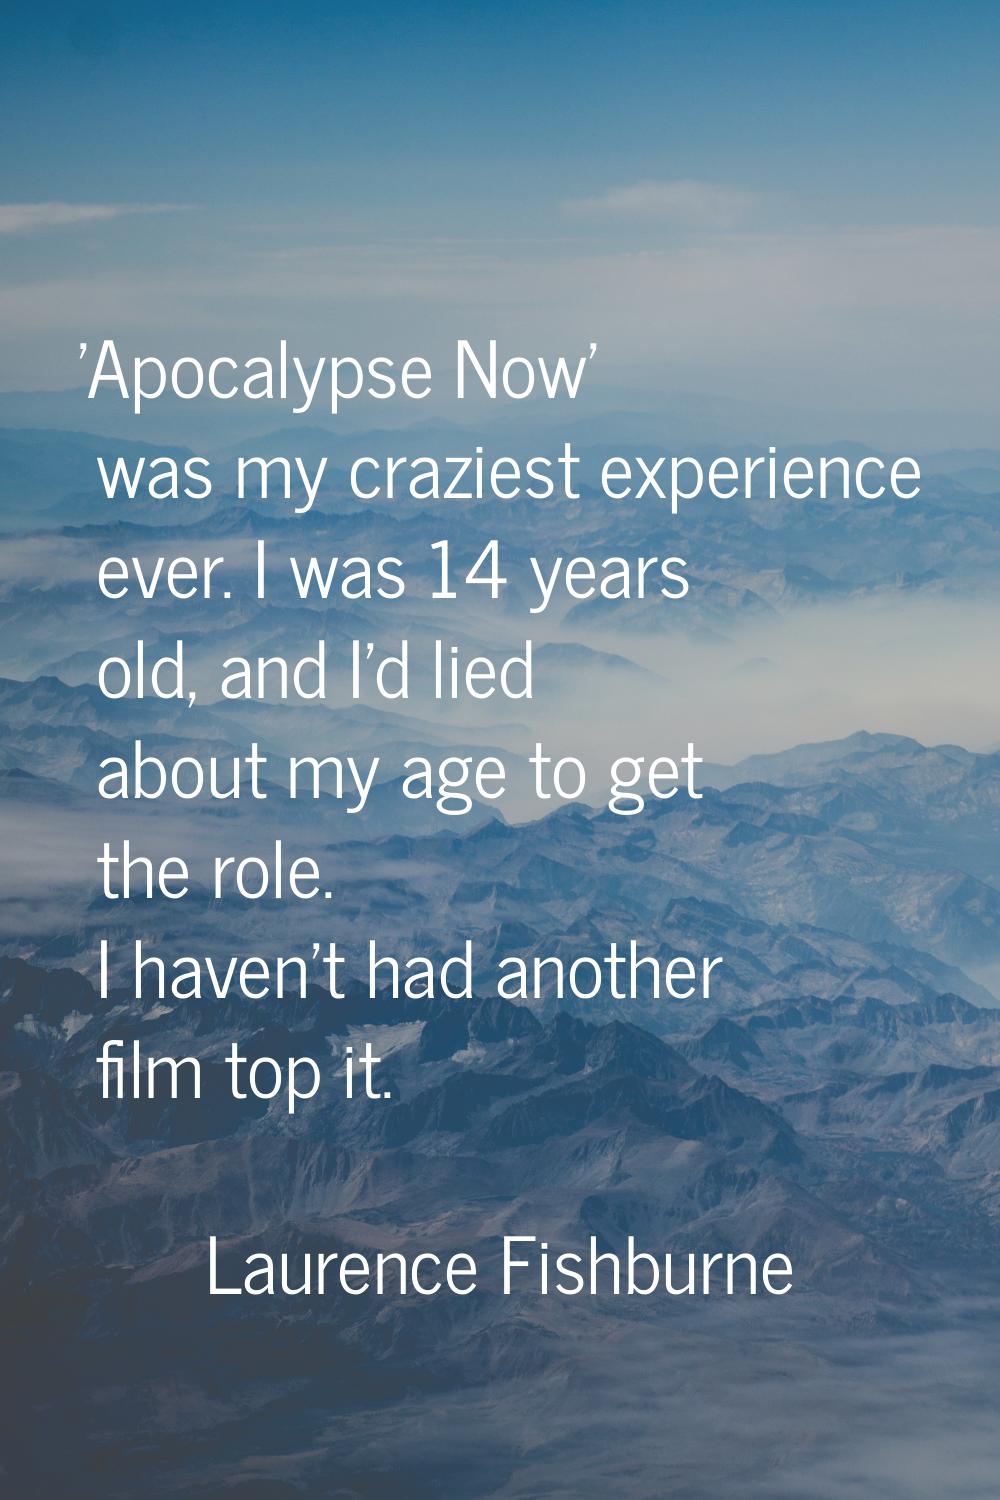 'Apocalypse Now' was my craziest experience ever. I was 14 years old, and I'd lied about my age to 